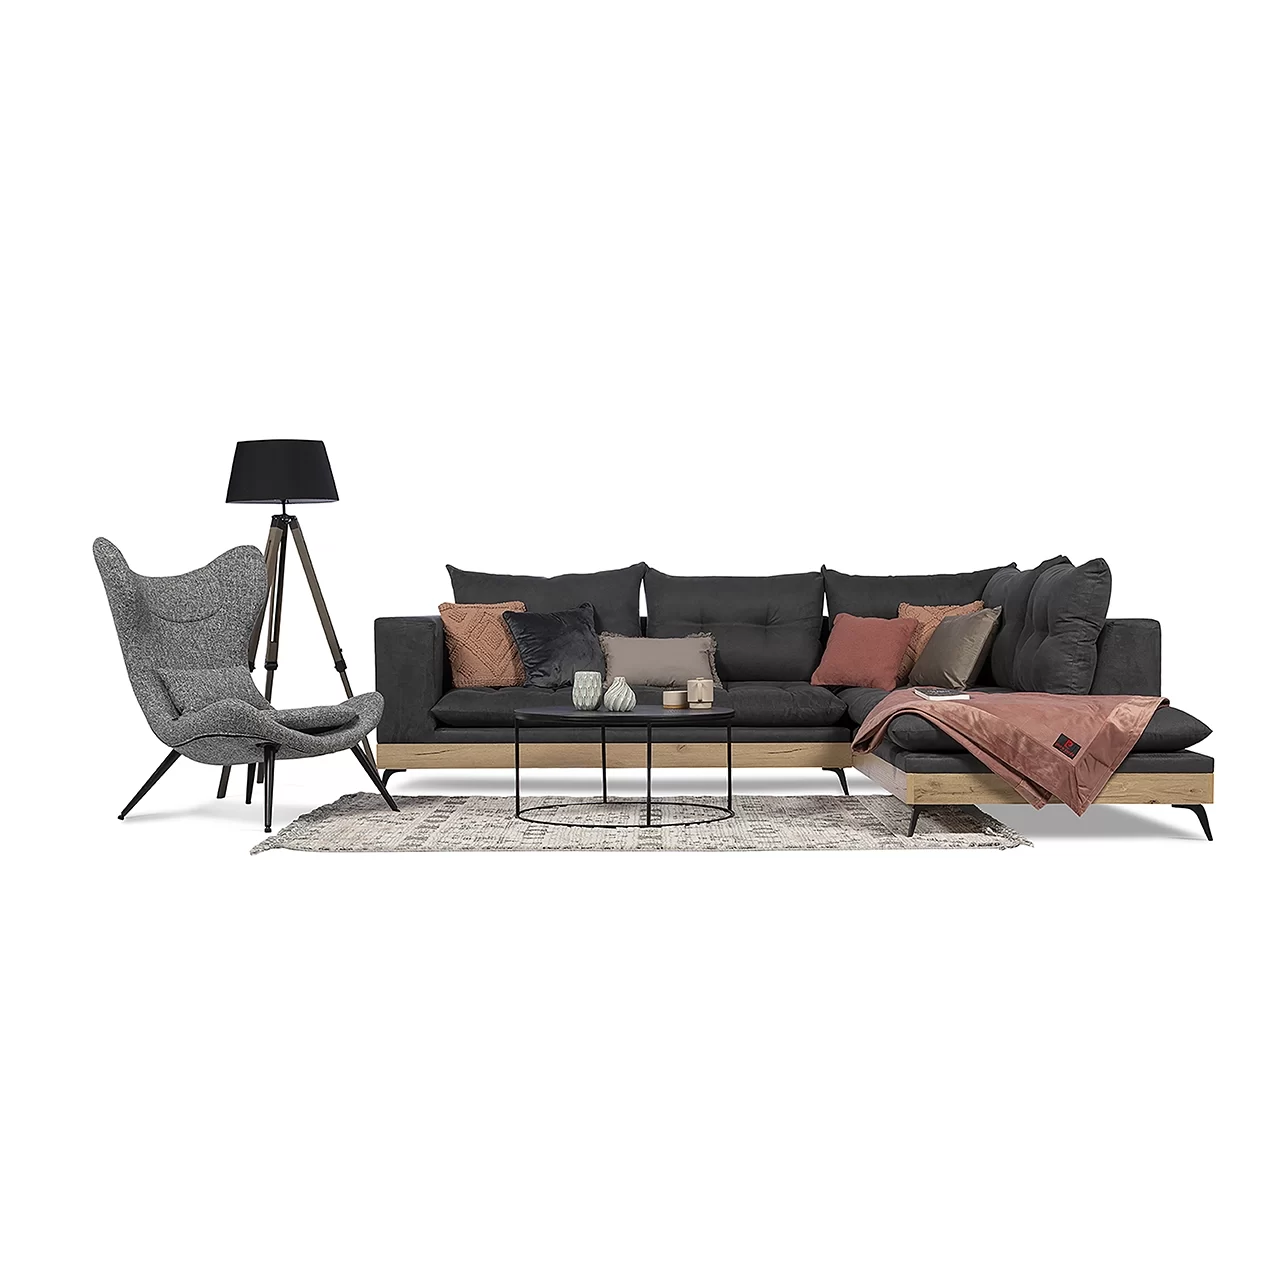 a grey armchair with behind it a lamb and beside it a black sectional couch sofa with multi color pillows and a small table in front of the sofa